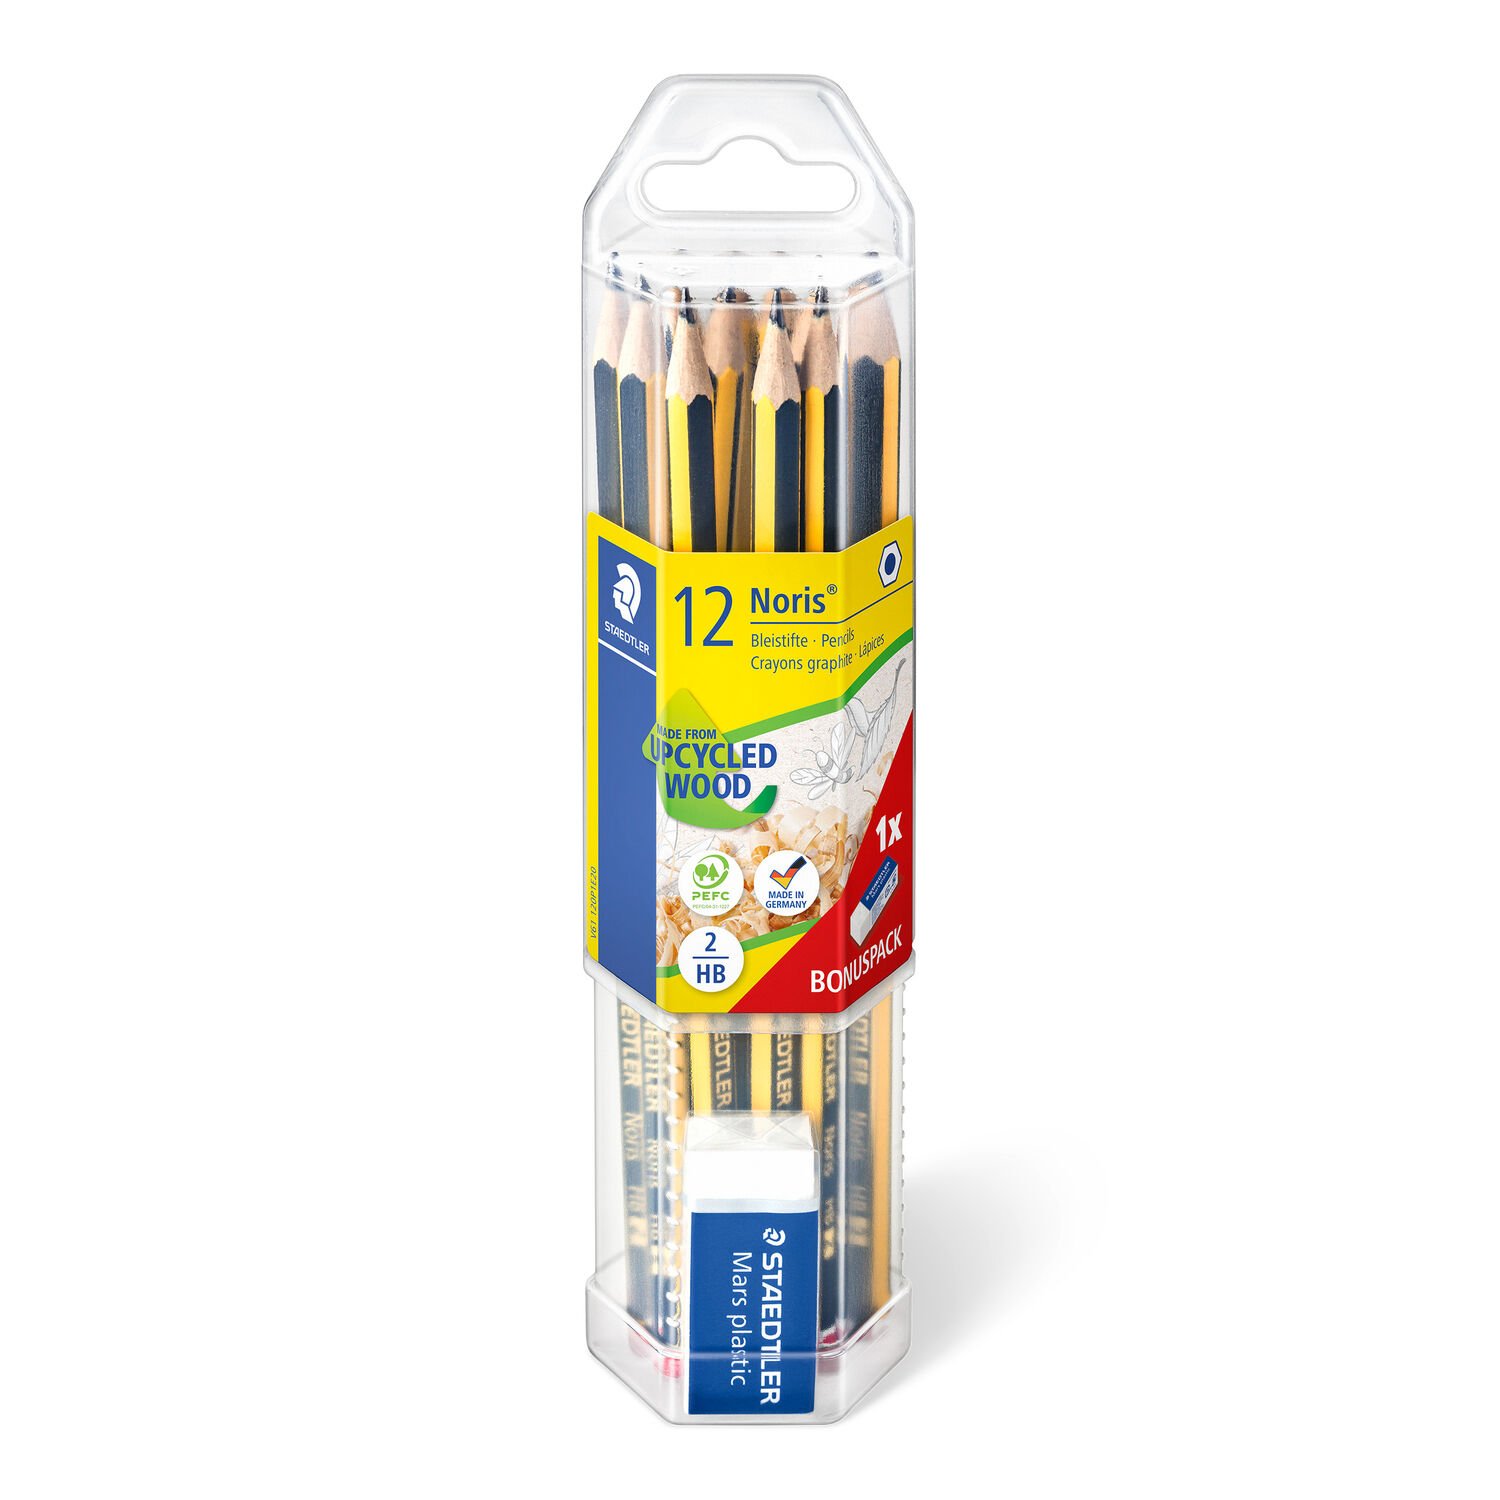 Kit feutres crayon graphite gomme taille crayon Staedlter